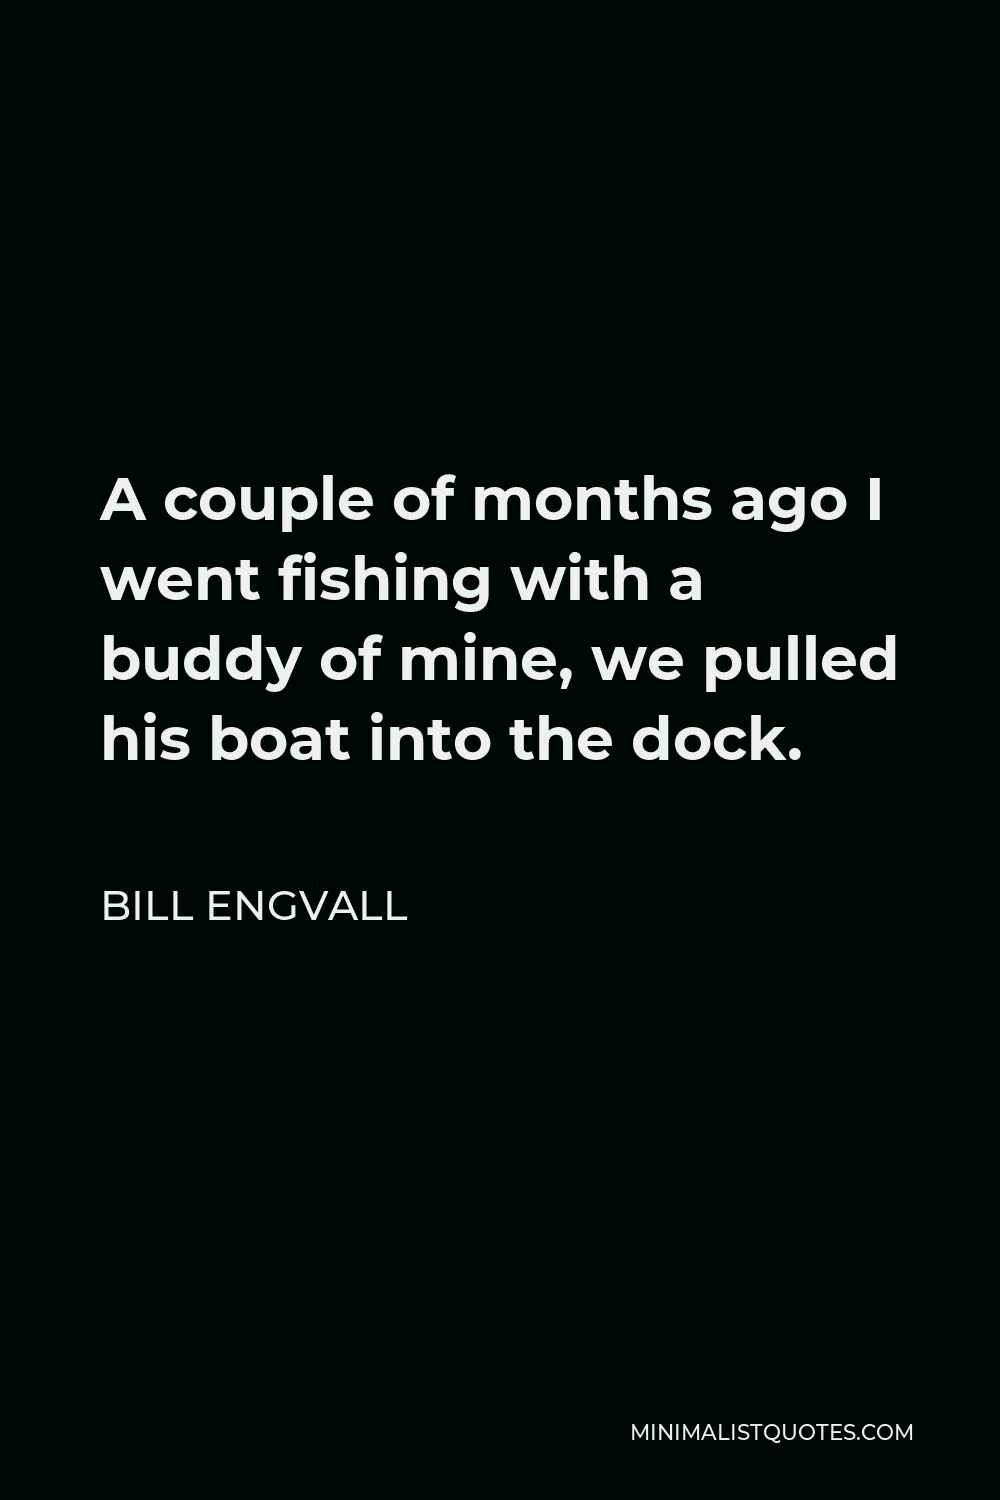 Bill Engvall Quote - A couple of months ago I went fishing with a buddy of mine, we pulled his boat into the dock.